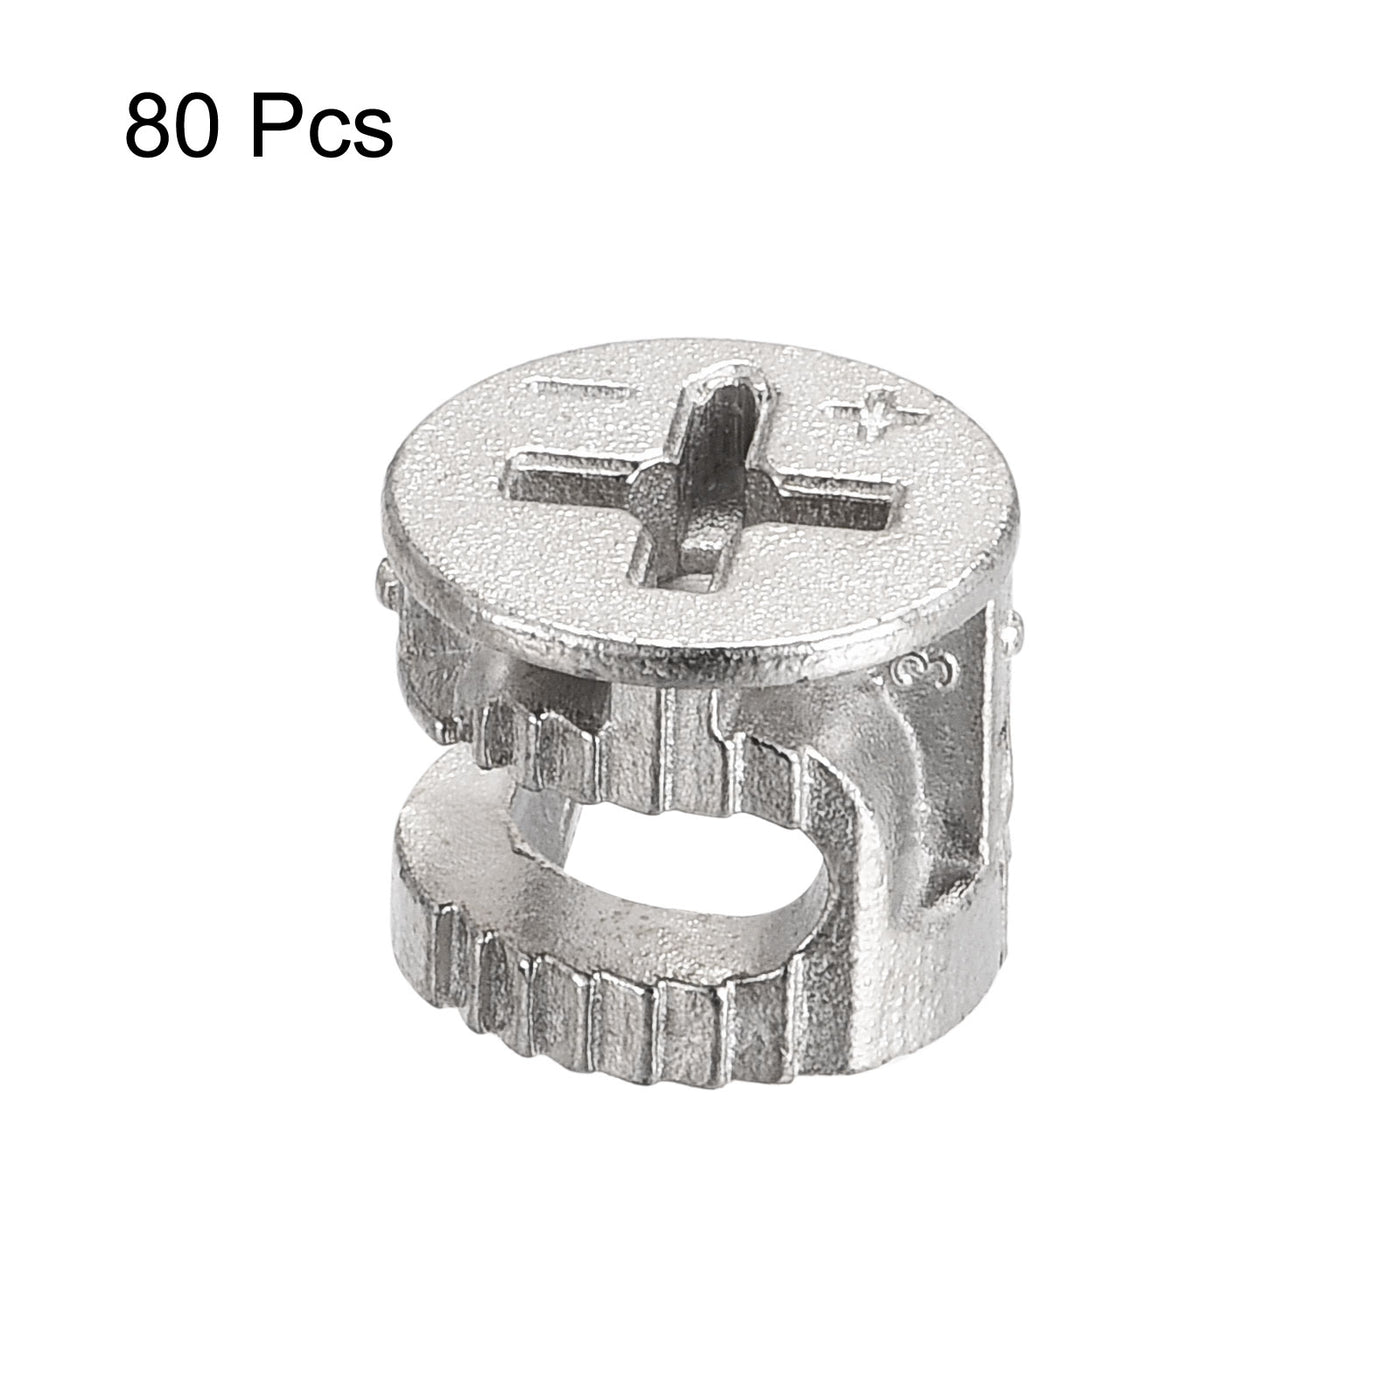 Uxcell Uxcell Cam Lock Nut for Furniture, 80pcs 11.65x9.8mm Joint Connector Locking Nuts